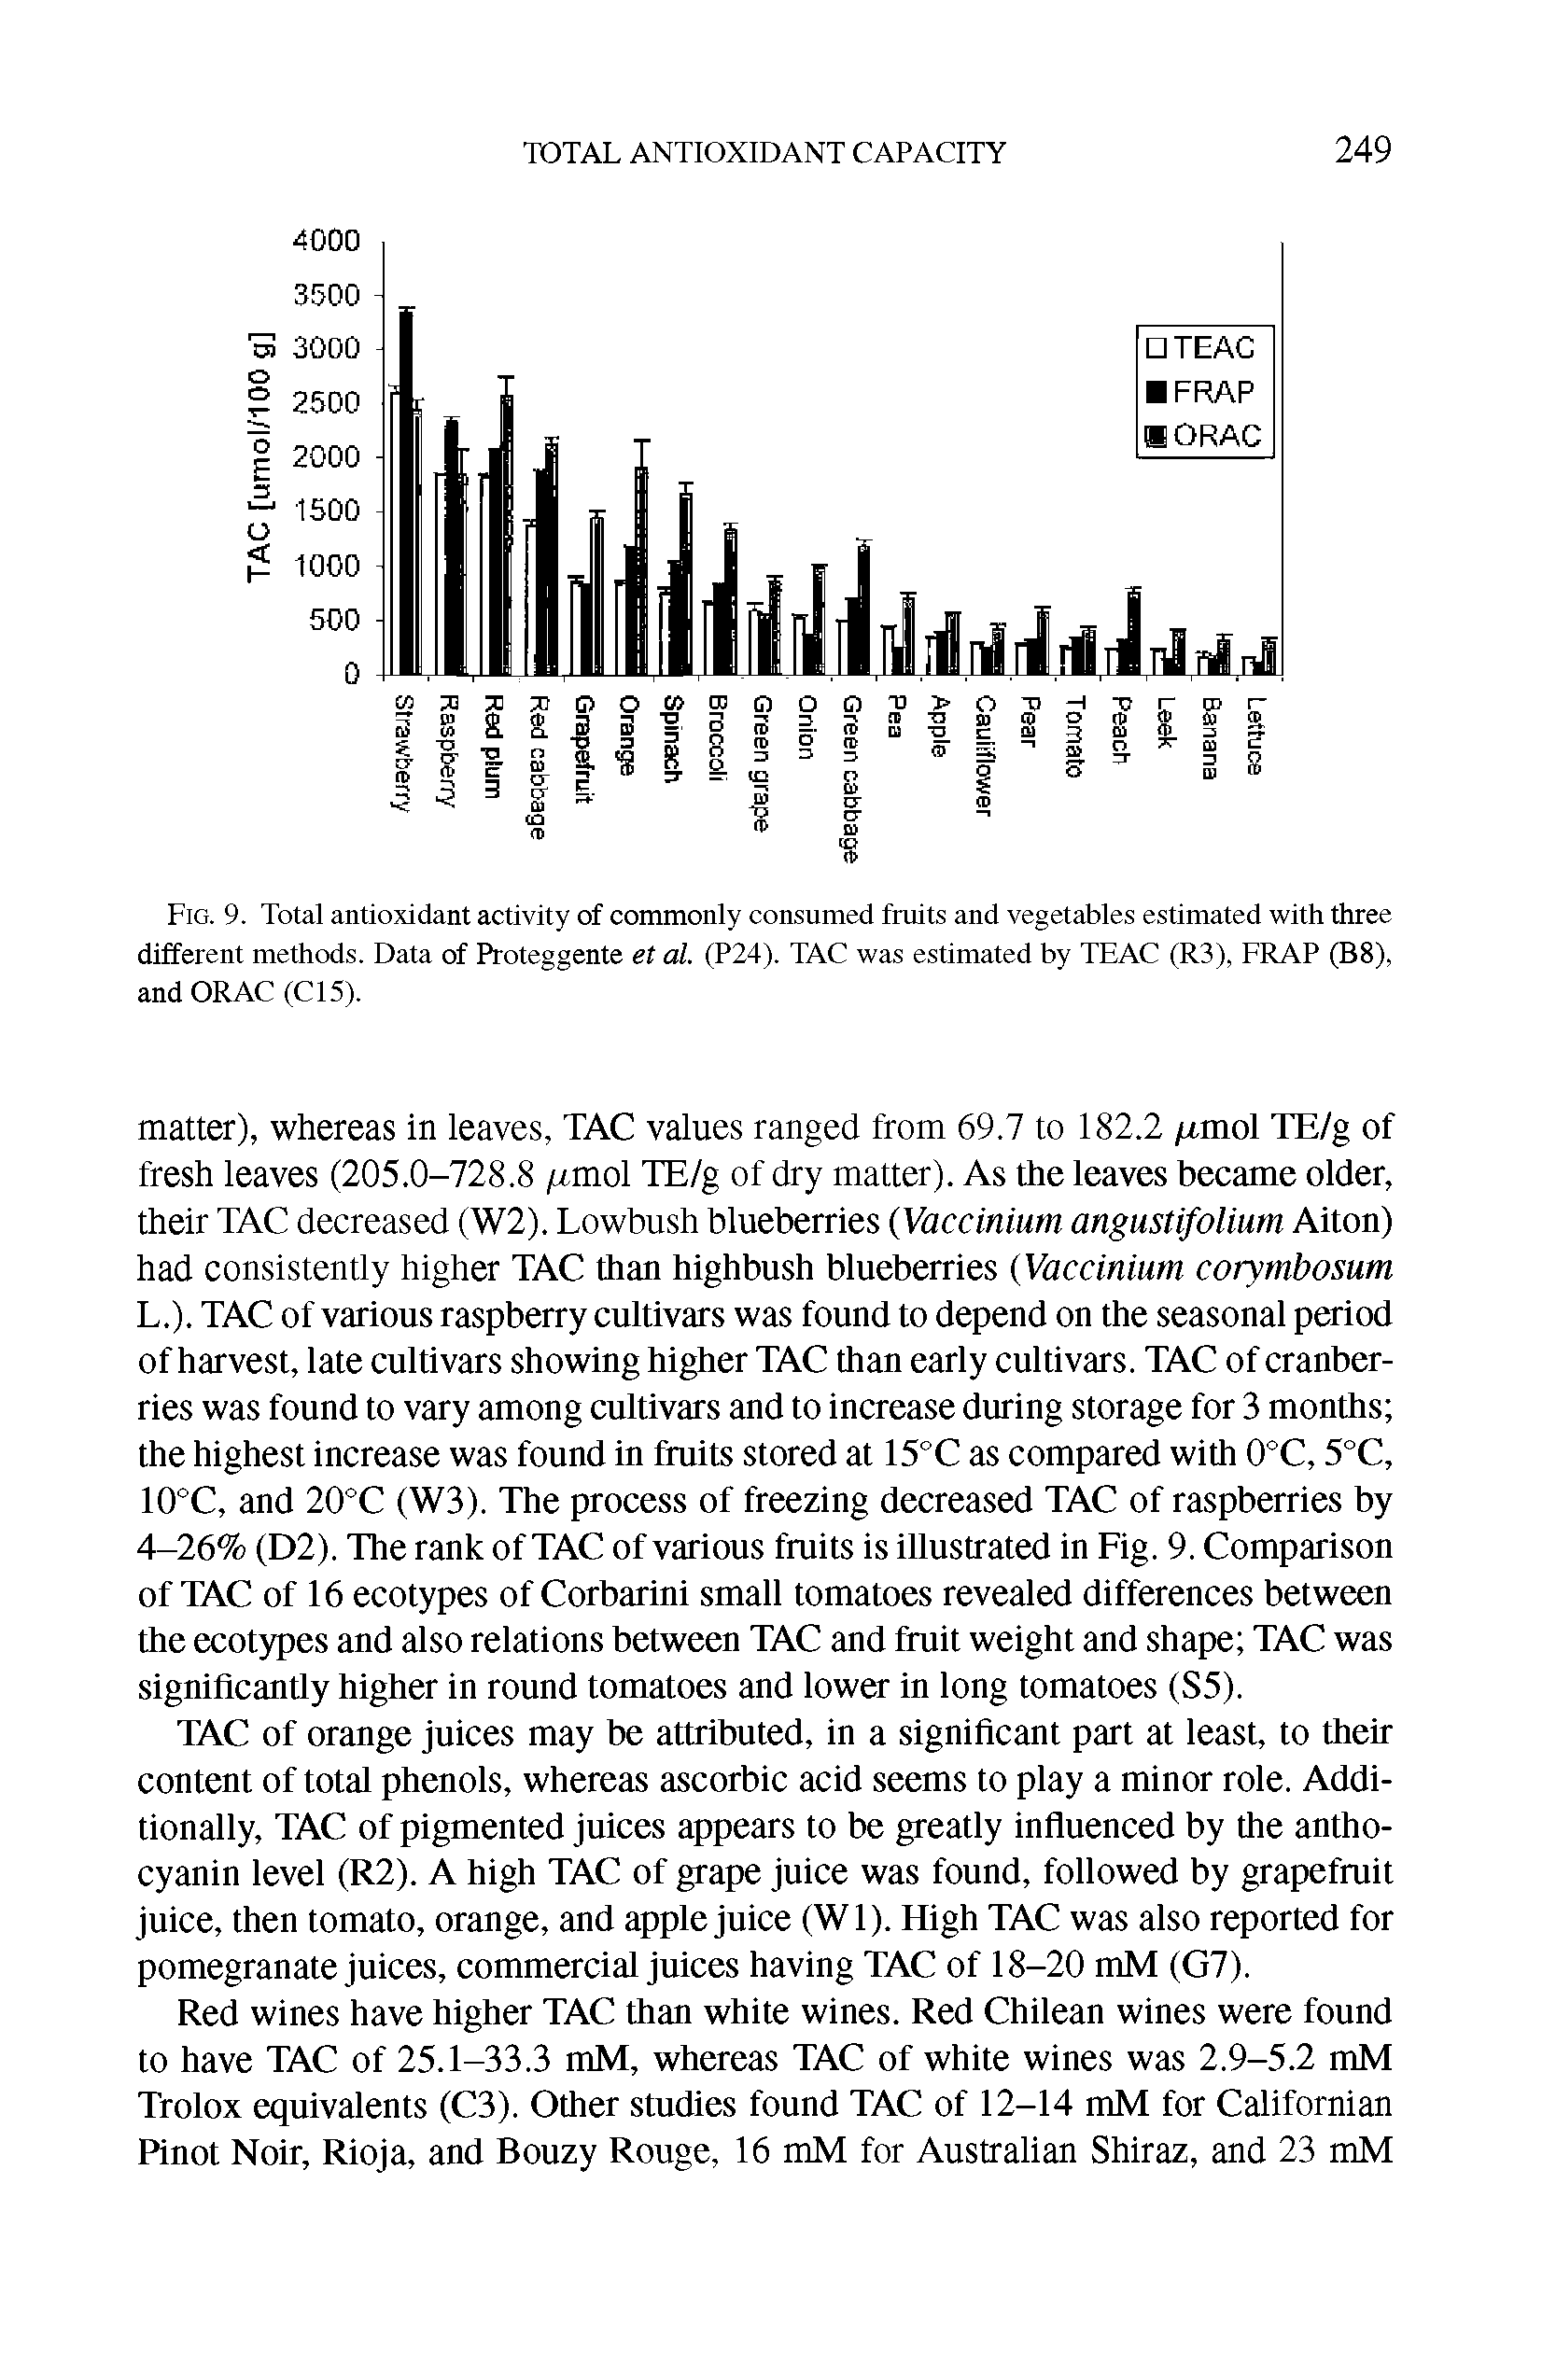 Fig. 9. Total antioxidant activity of commonly consumed fruits and vegetables estimated with three different methods. Data of Proteggente et al. (P24). TAC was estimated by TEAC (R3), FRAP (B8), and ORAC (Cl5).